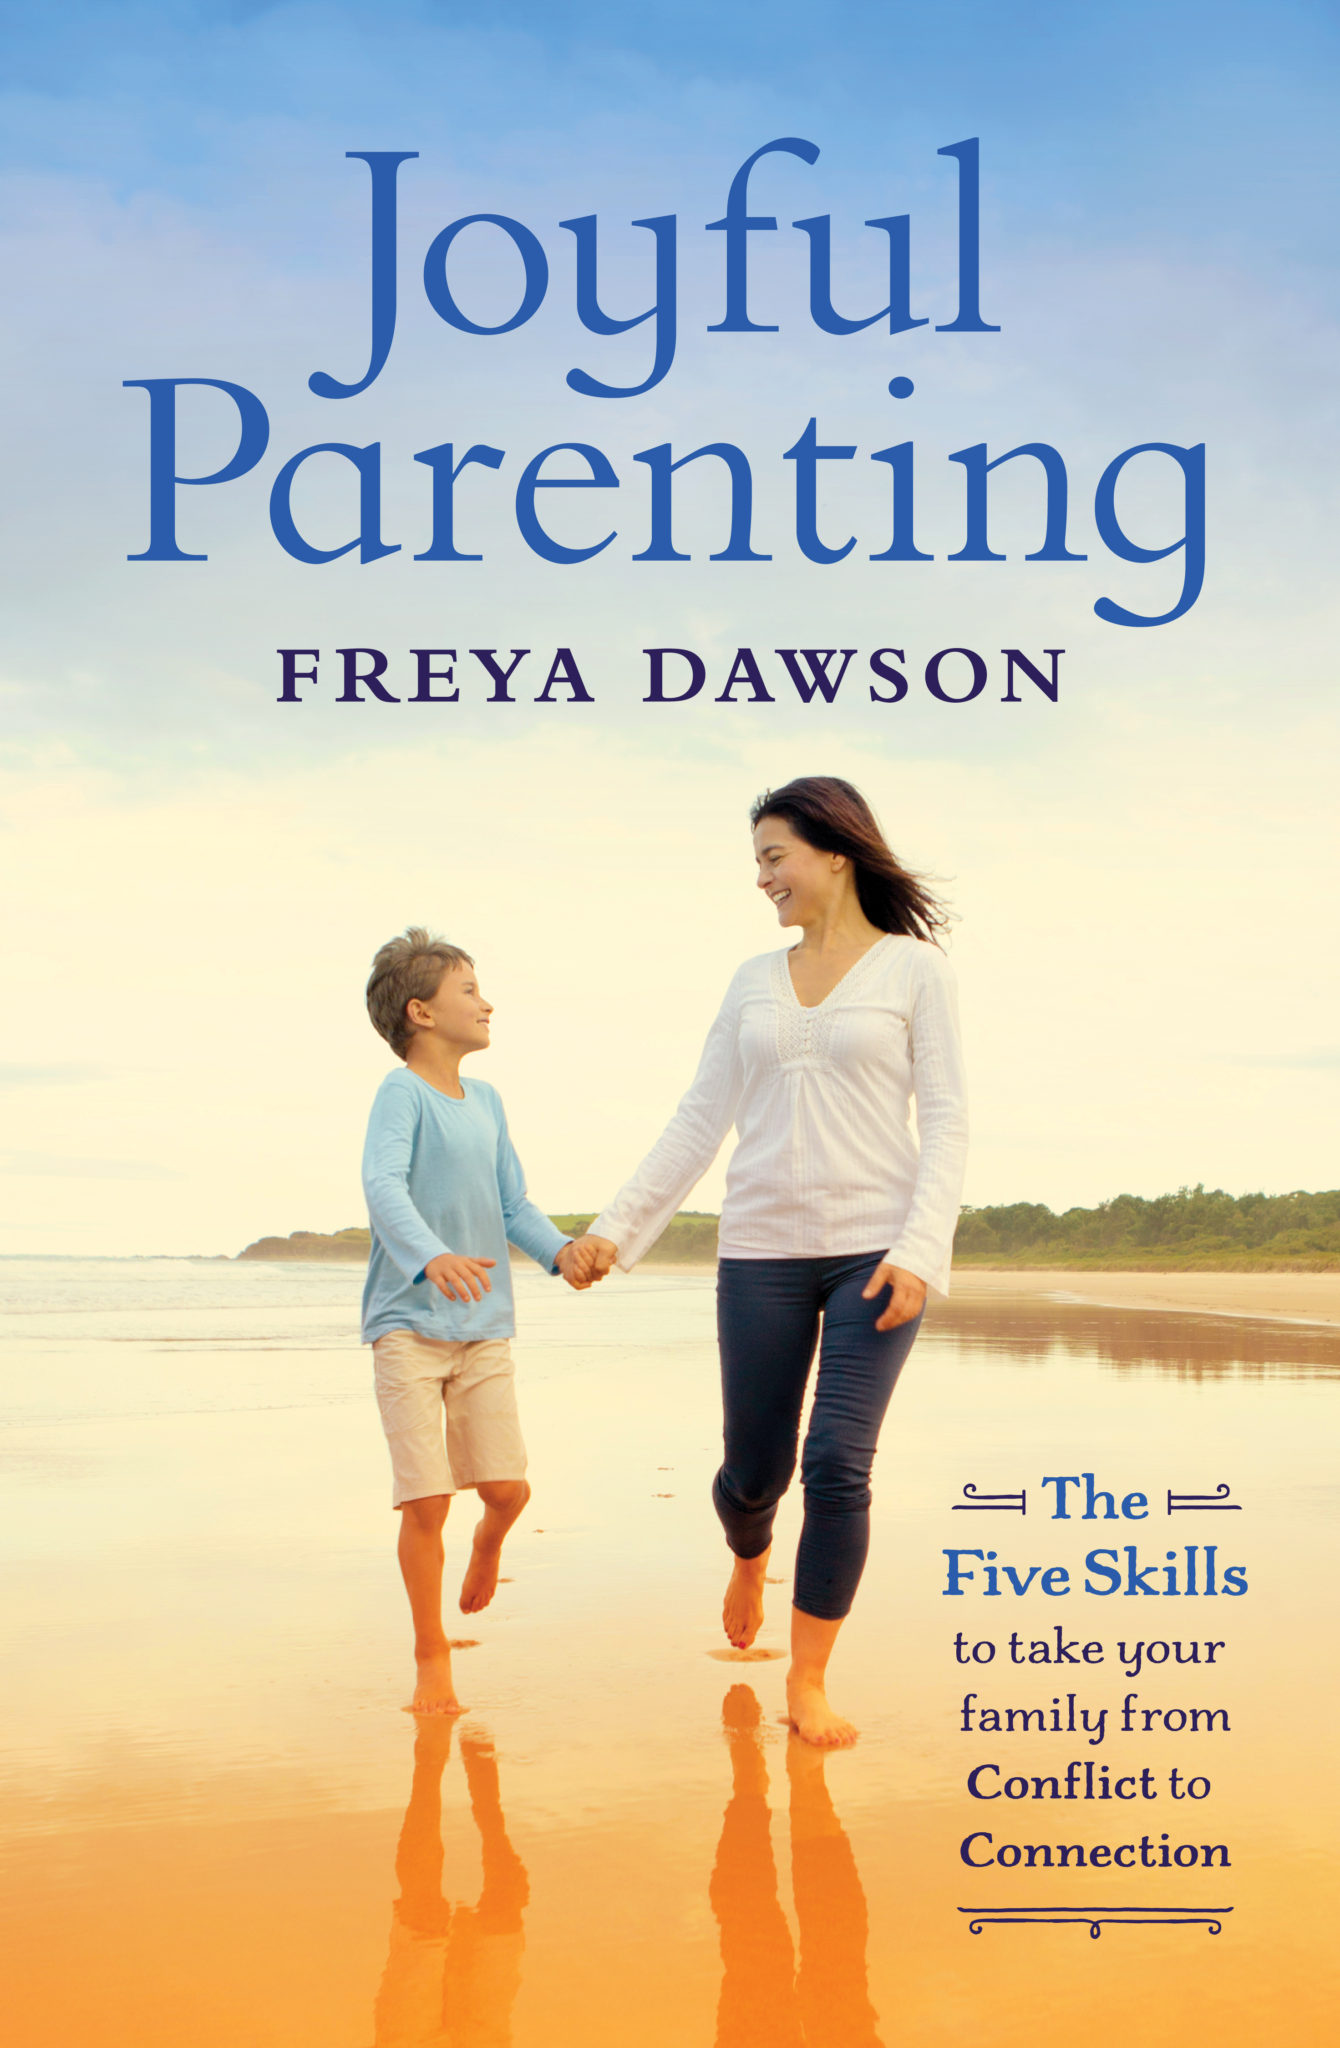 FREE: Joyful Parenting: The Five Skills to take your family from Conflict to Connection by Freya Dawson